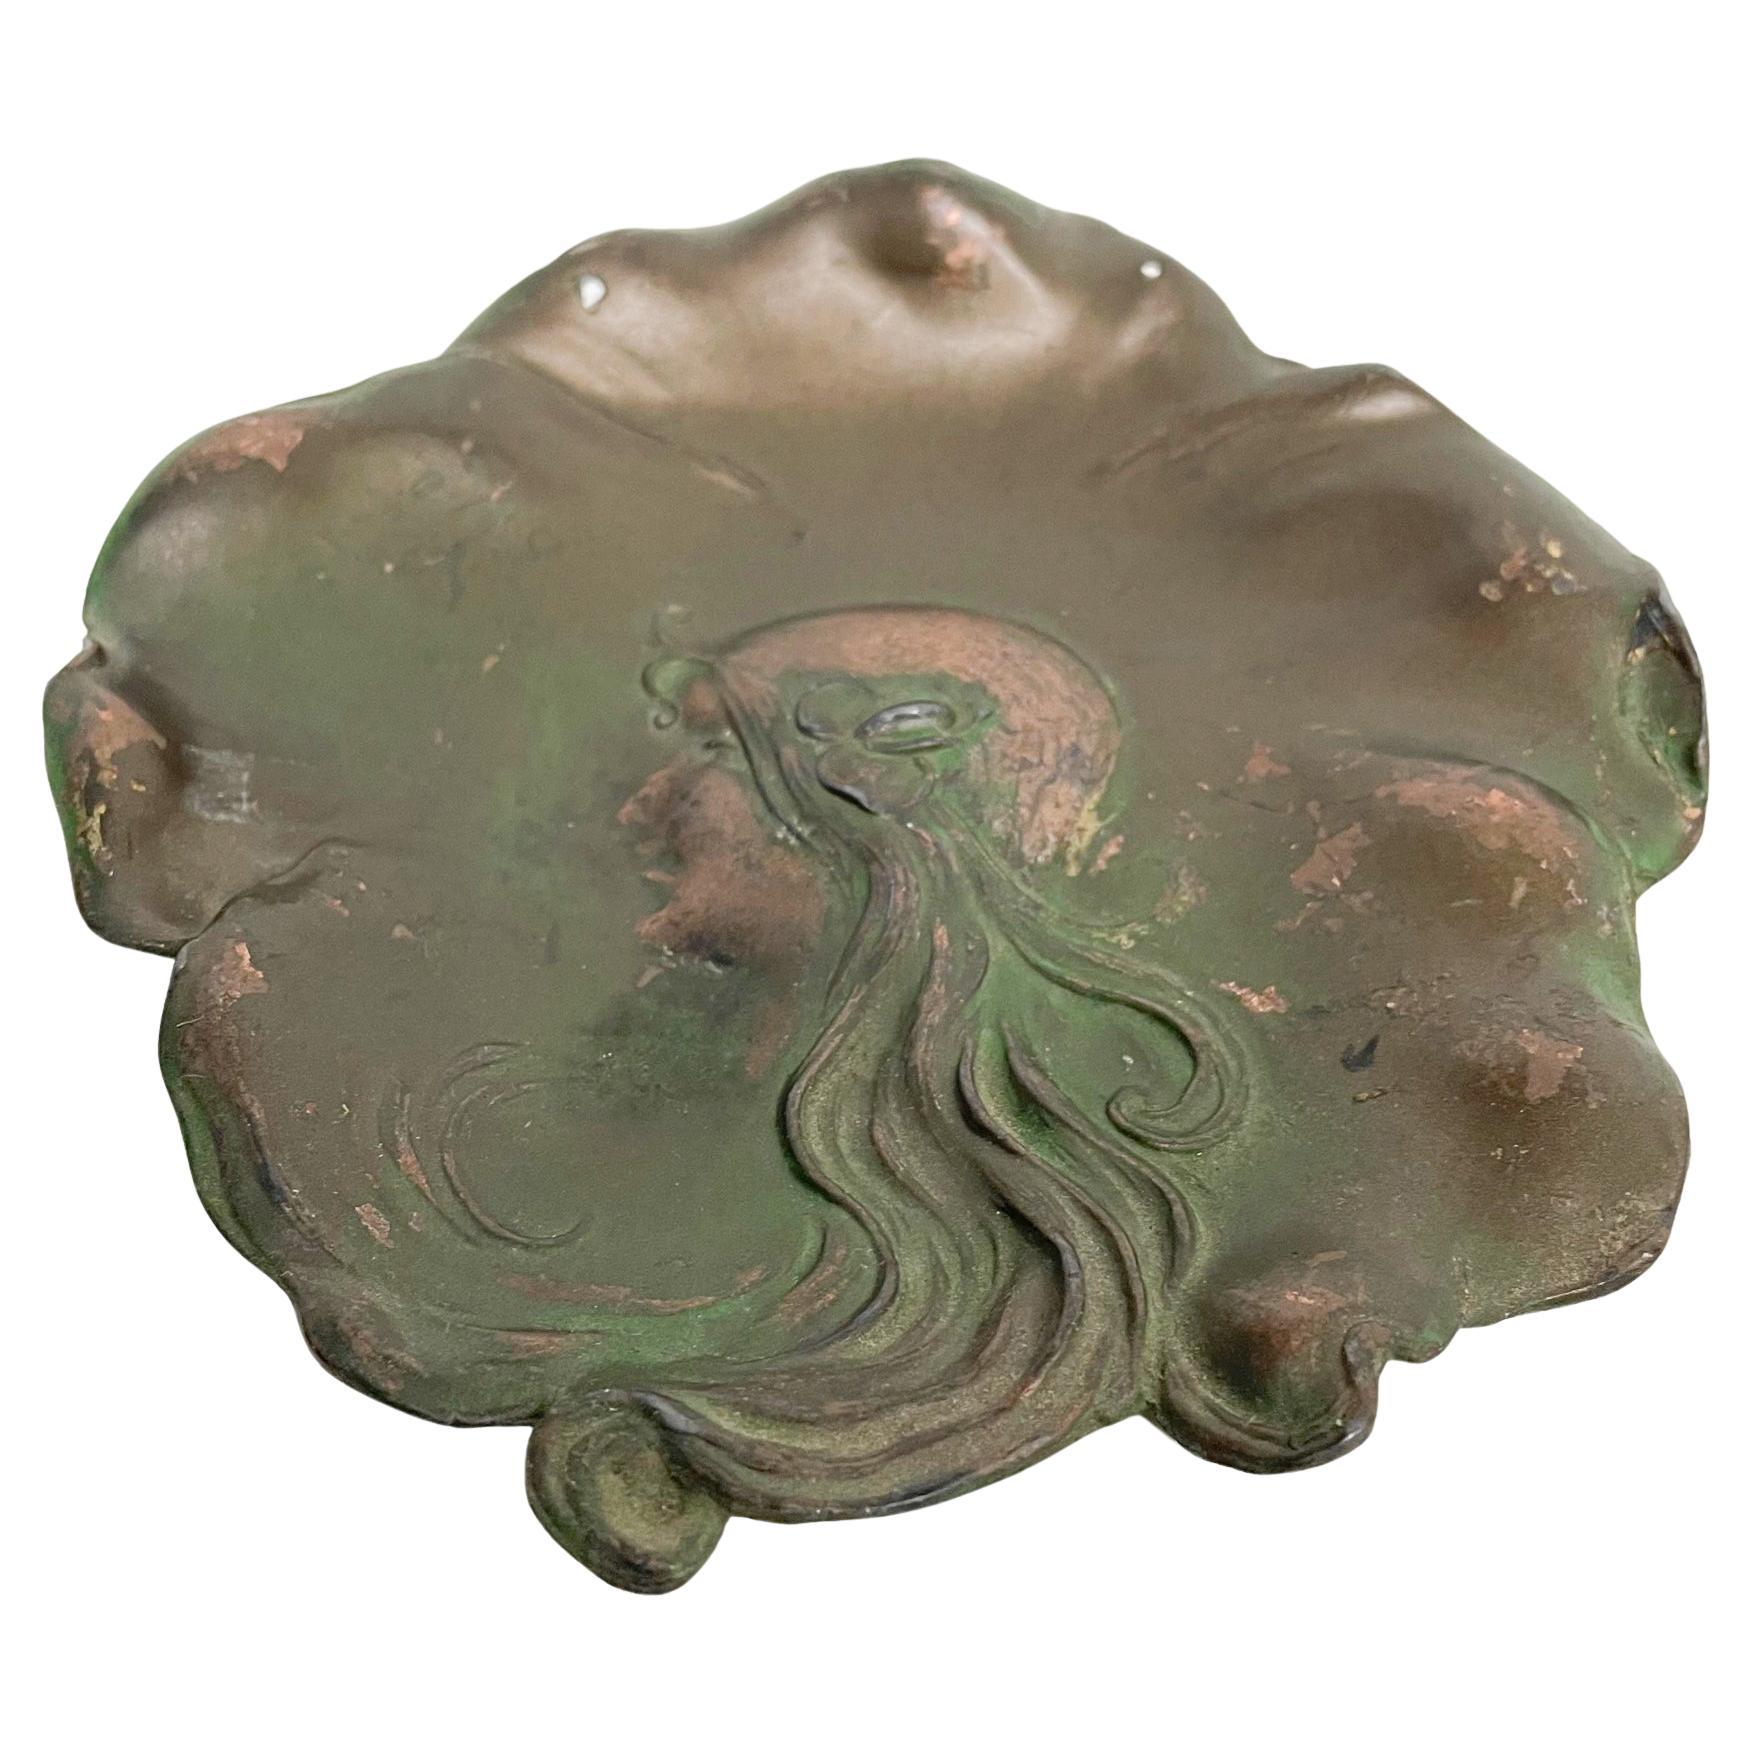 Art Nouveau Deco Fair Maiden Sculptural Leaf Dish - pretty face and flowing hair.
Signed and Dated April 4, 1906
5 diameter x .5
Original Unrestored Fair Vintage Condition - 2 small holes at top.  Minor losses and minor fading.
See images please.

  